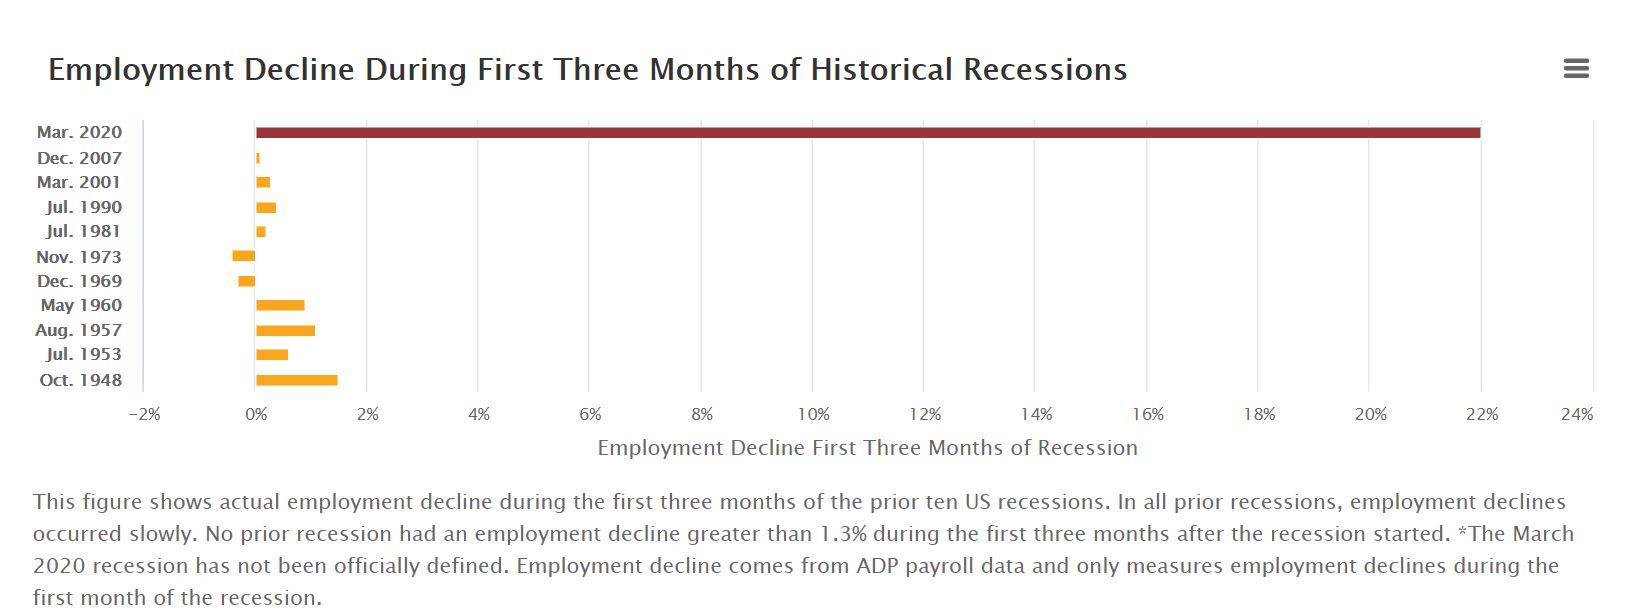 Employment Decline During First Three Months of Historical Recessions